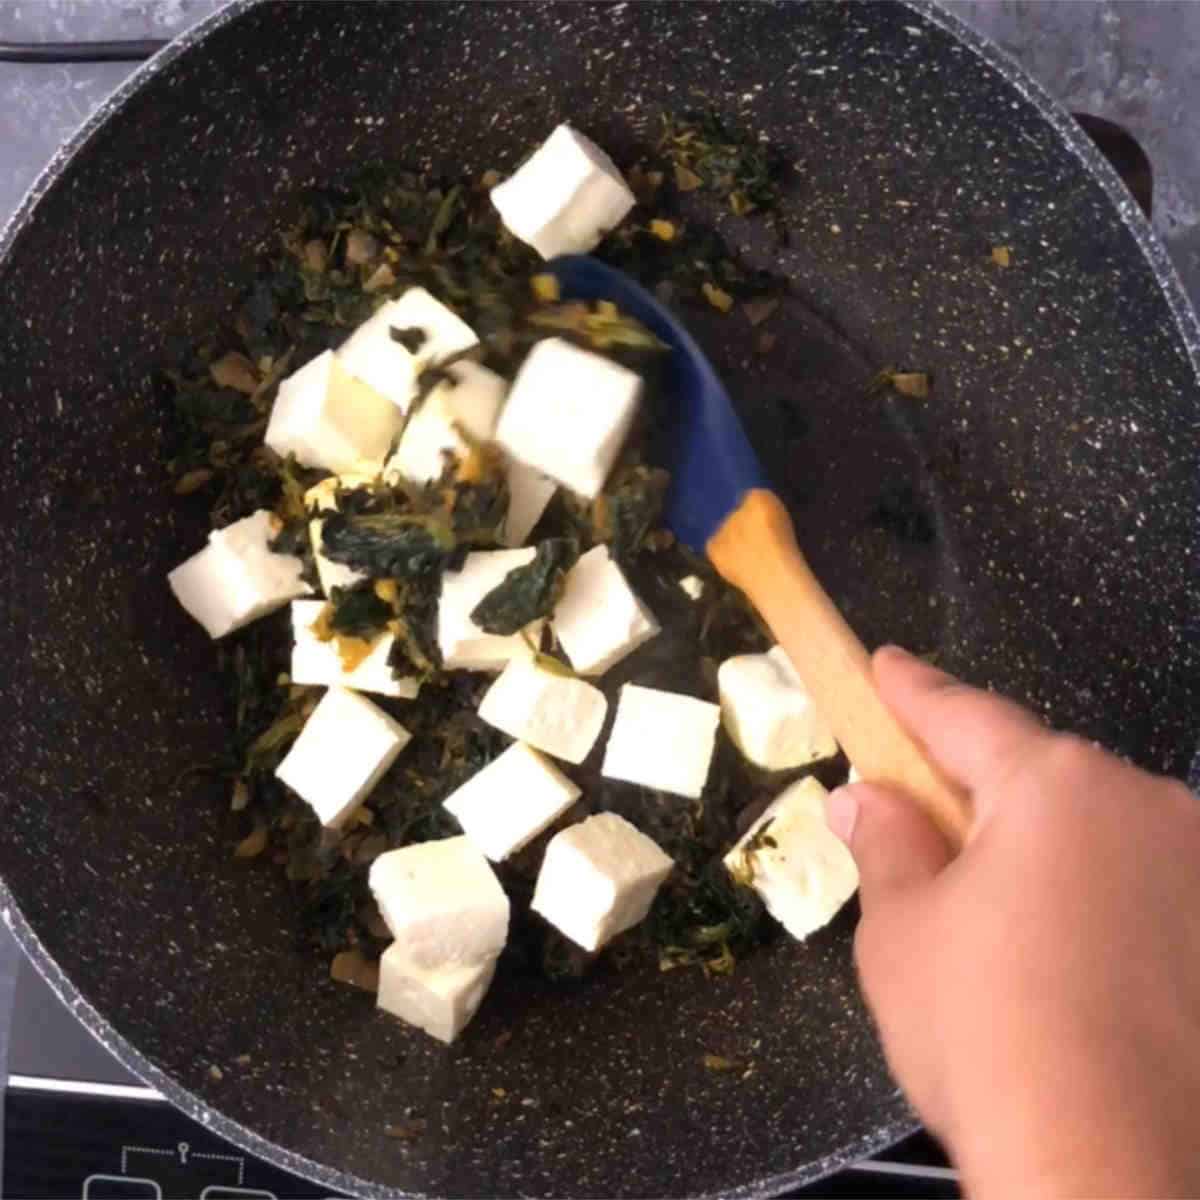 Add paneer cubes and mix gently.